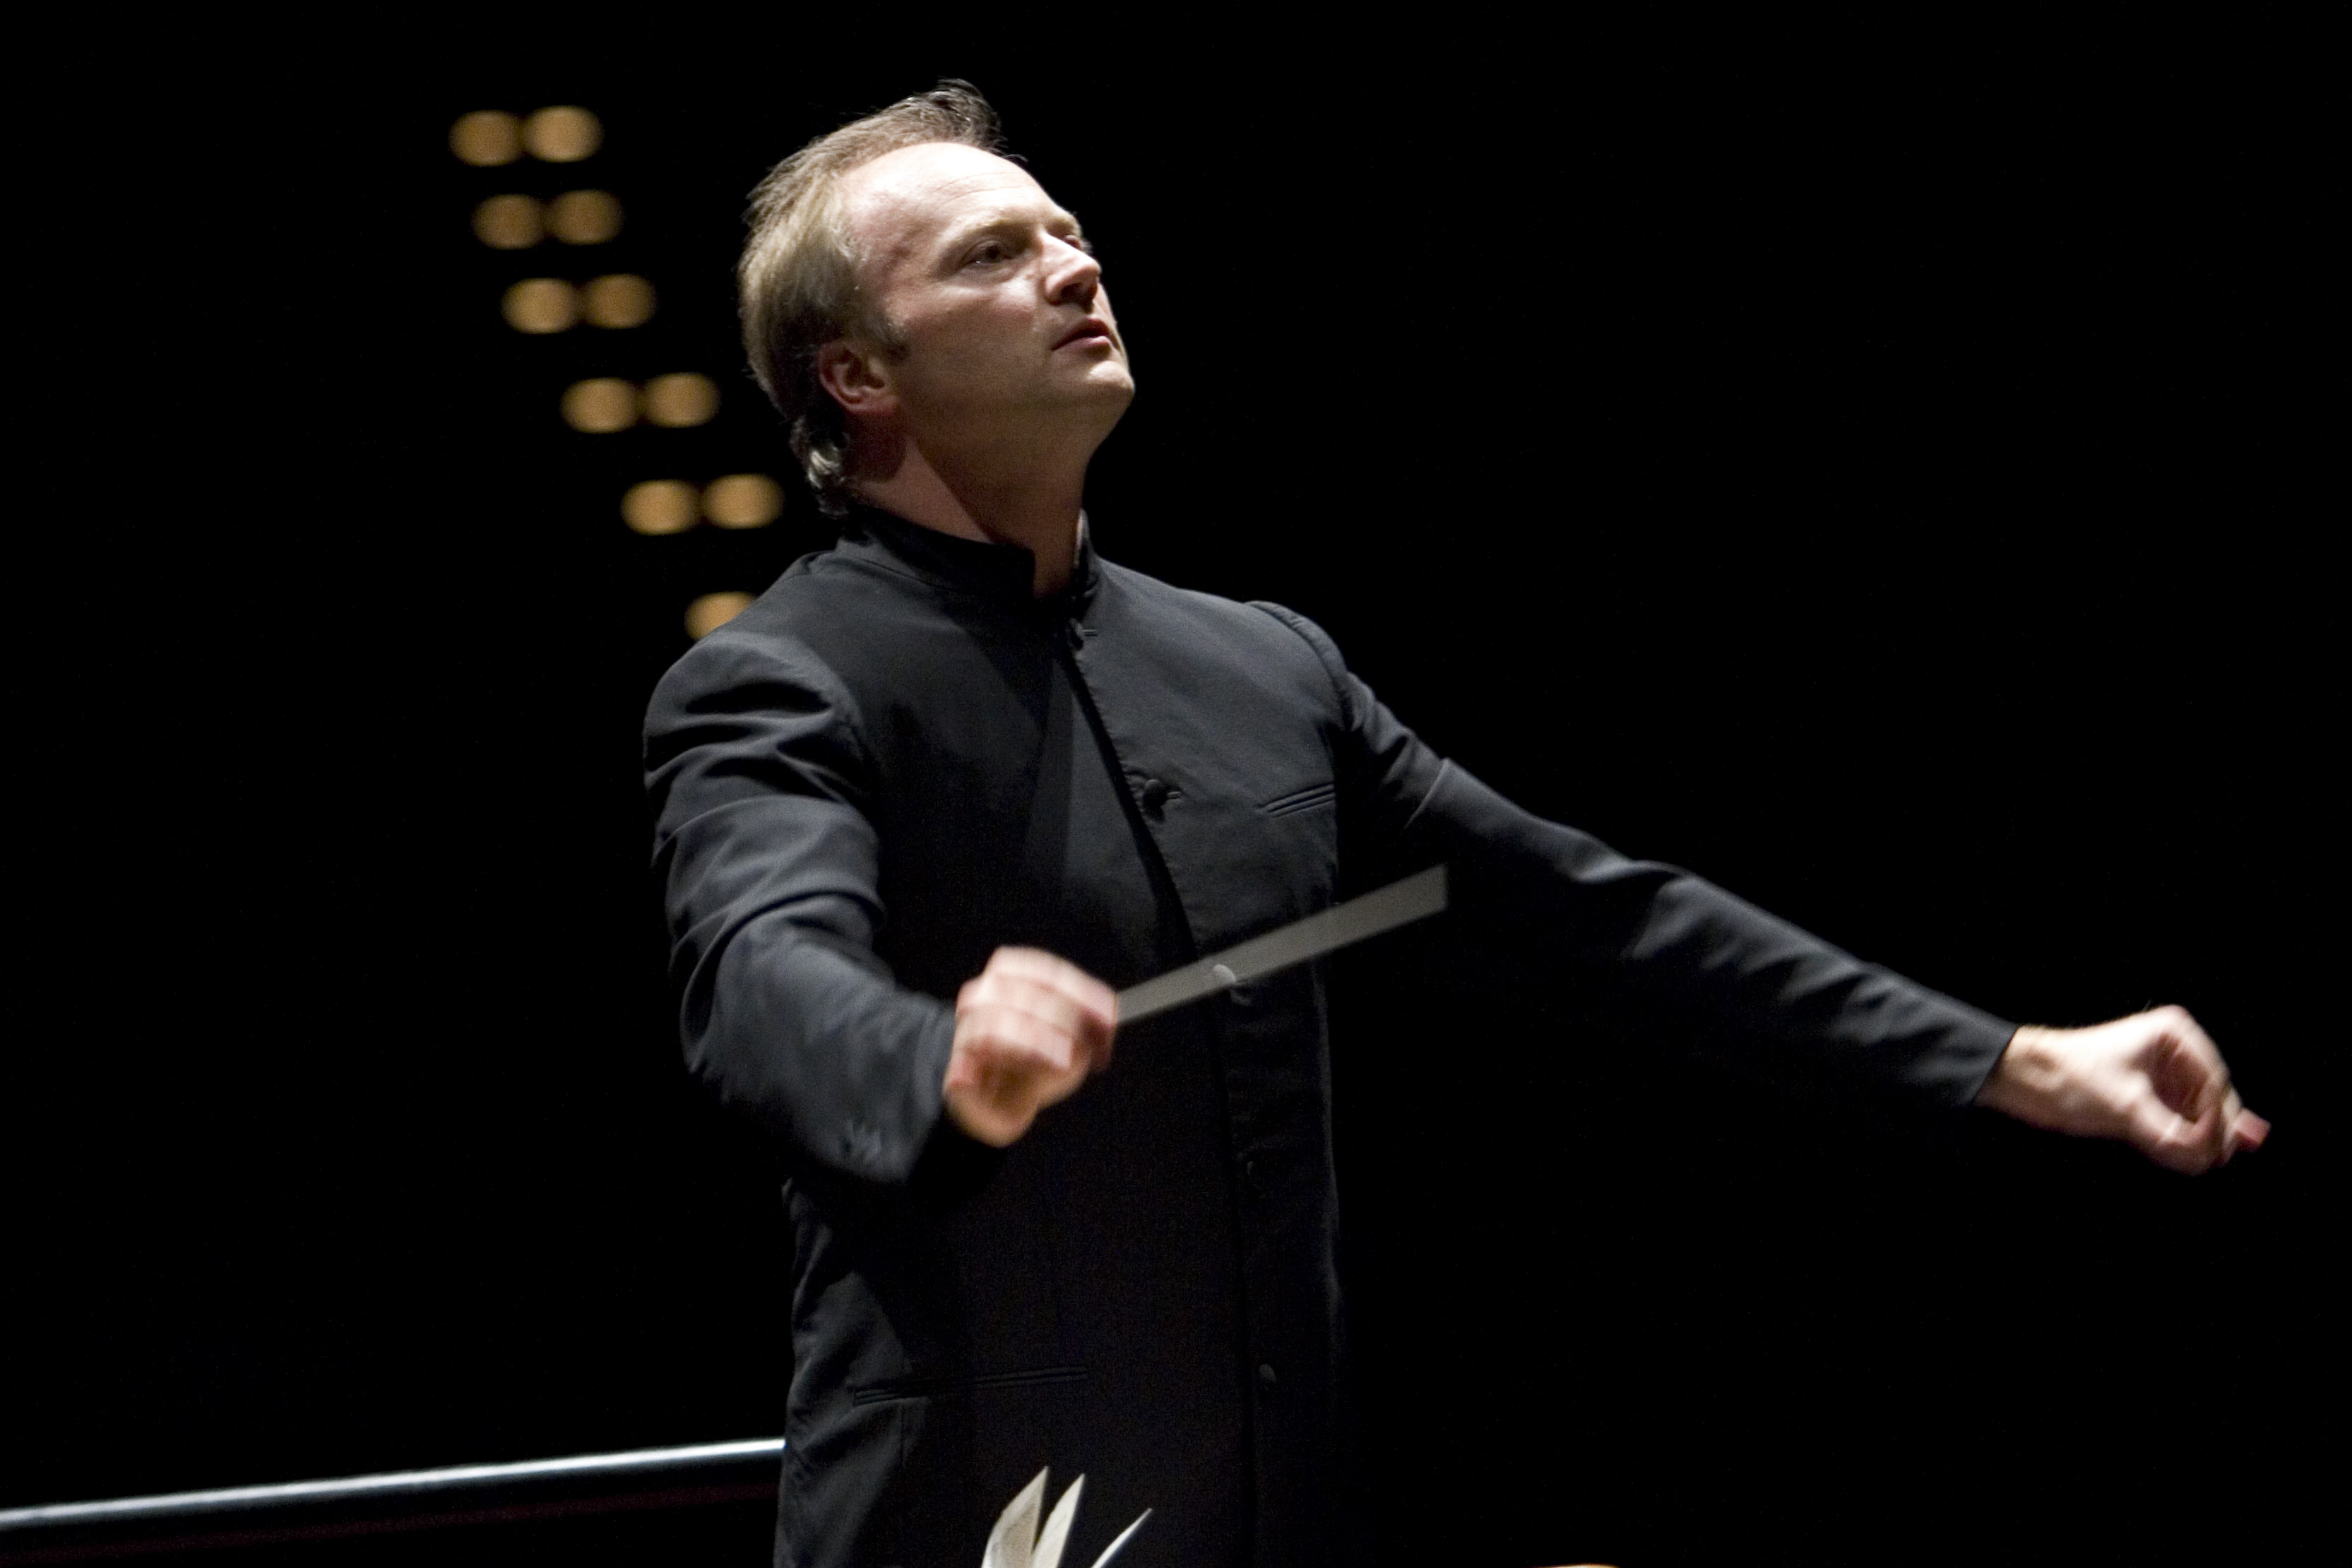 Conductor Gianandrea Noseda delivered an intense rendition of Verdi’s Requiem at the Hong Kong Cultural Centre. Photo: Teatro Regio Torino